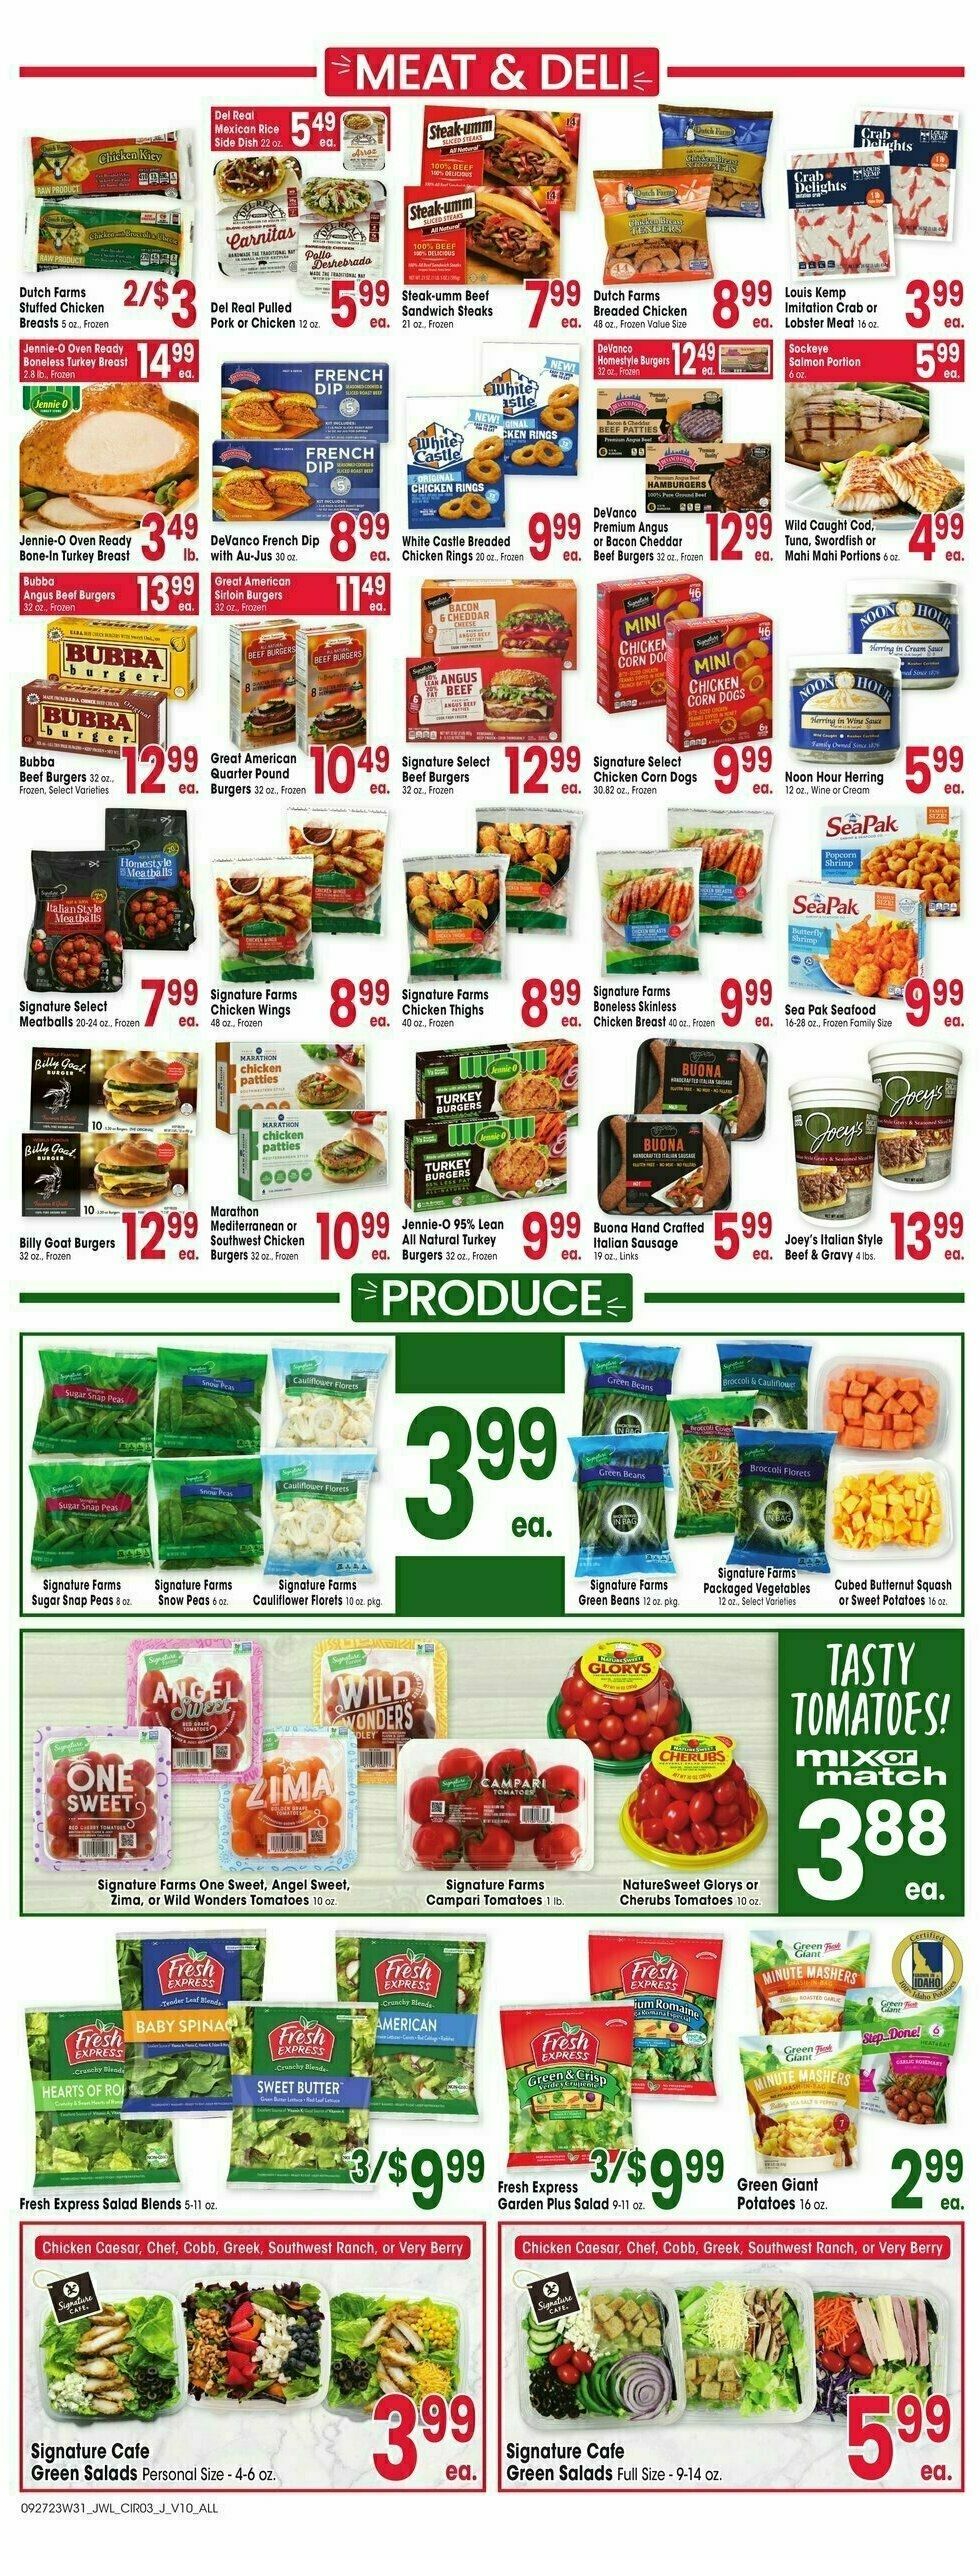 Jewel Osco Weekly Ad from September 27